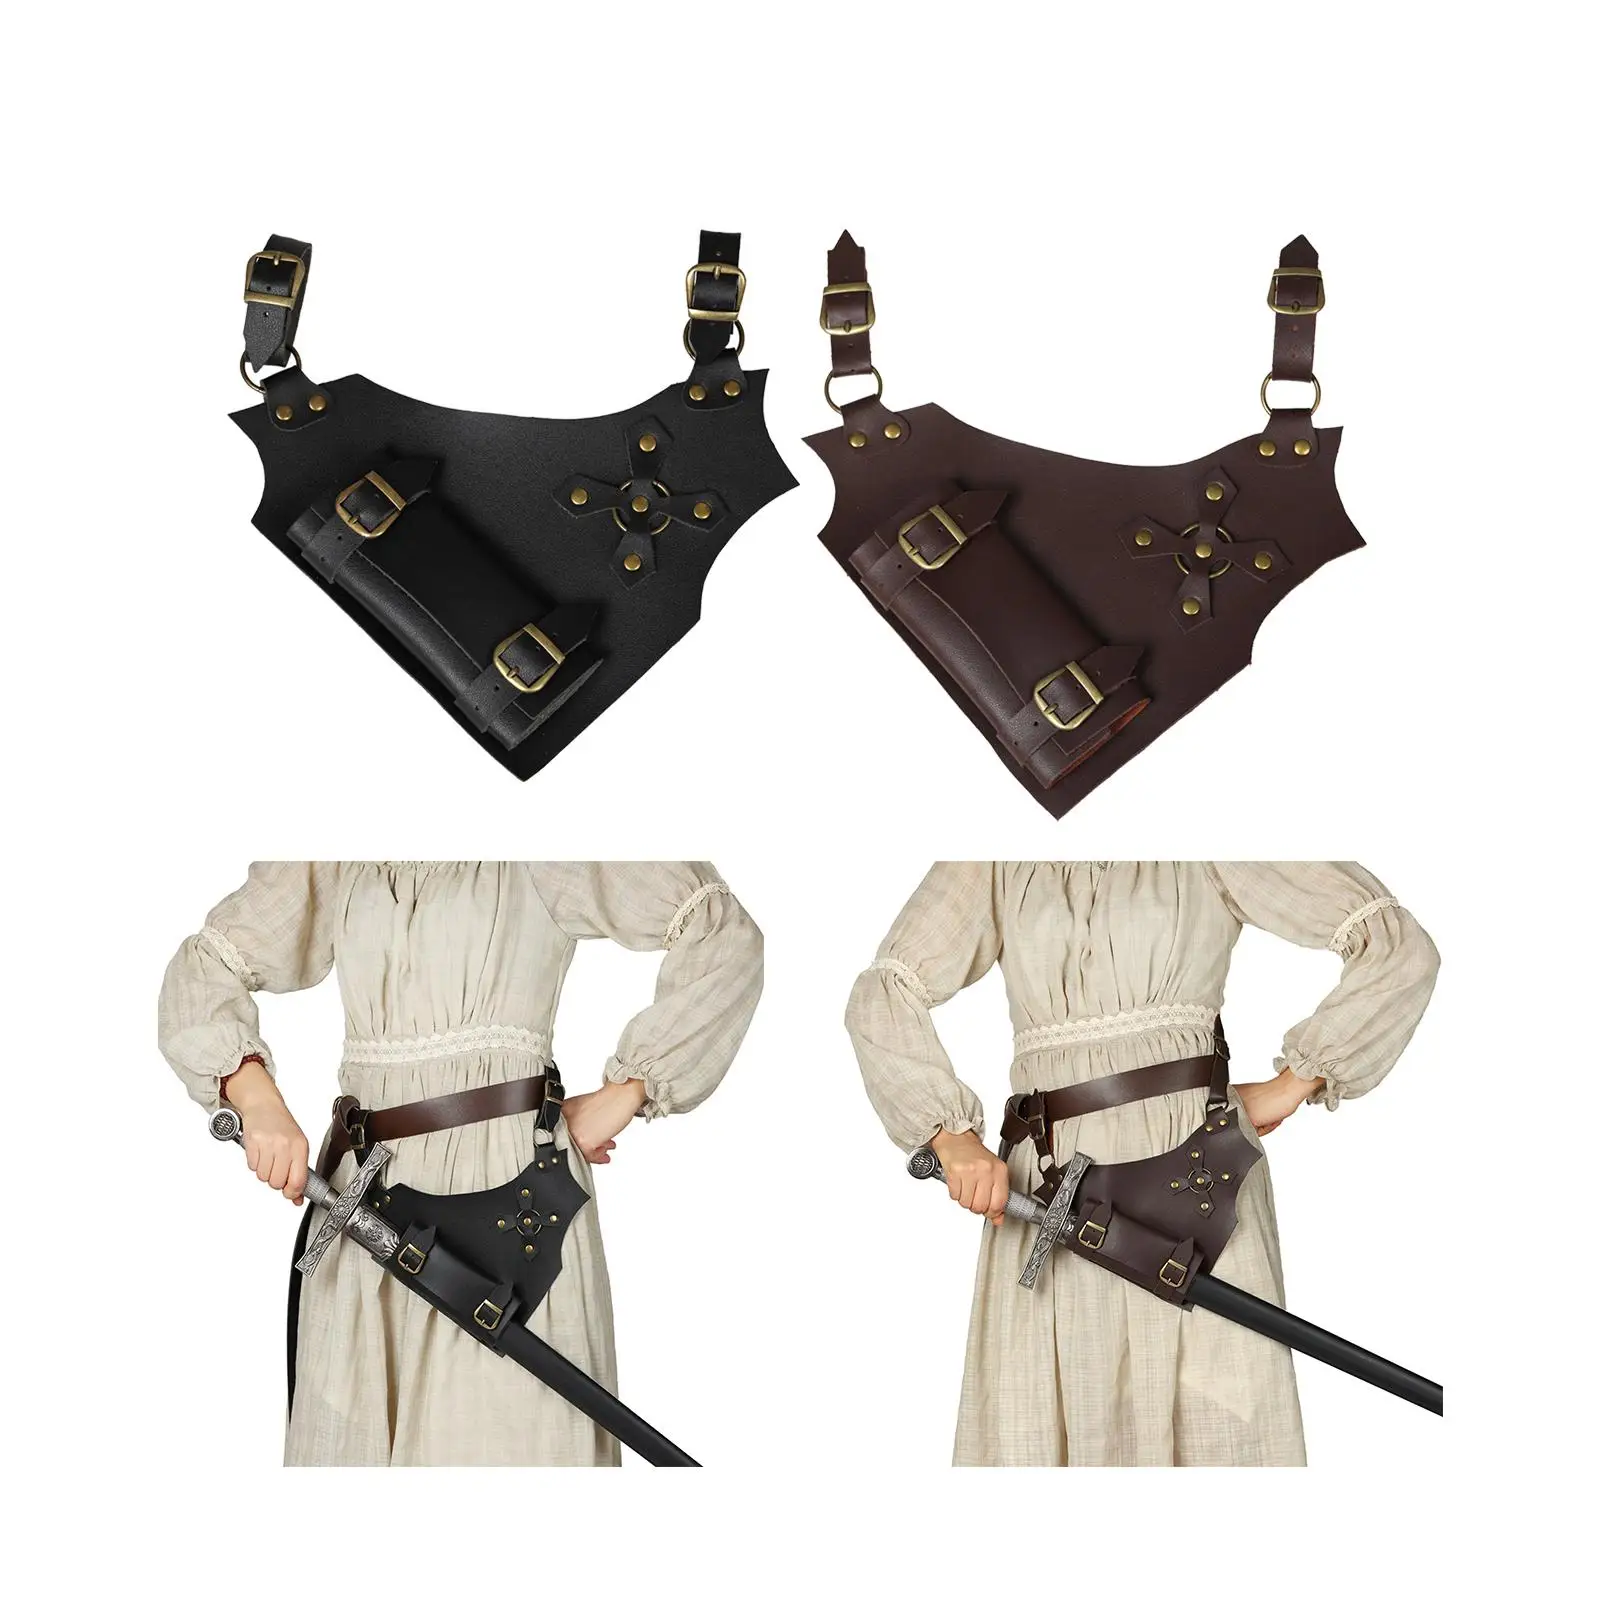 PU Leather Sword Display Belt Sheath for Cosplay for Fancy Dress